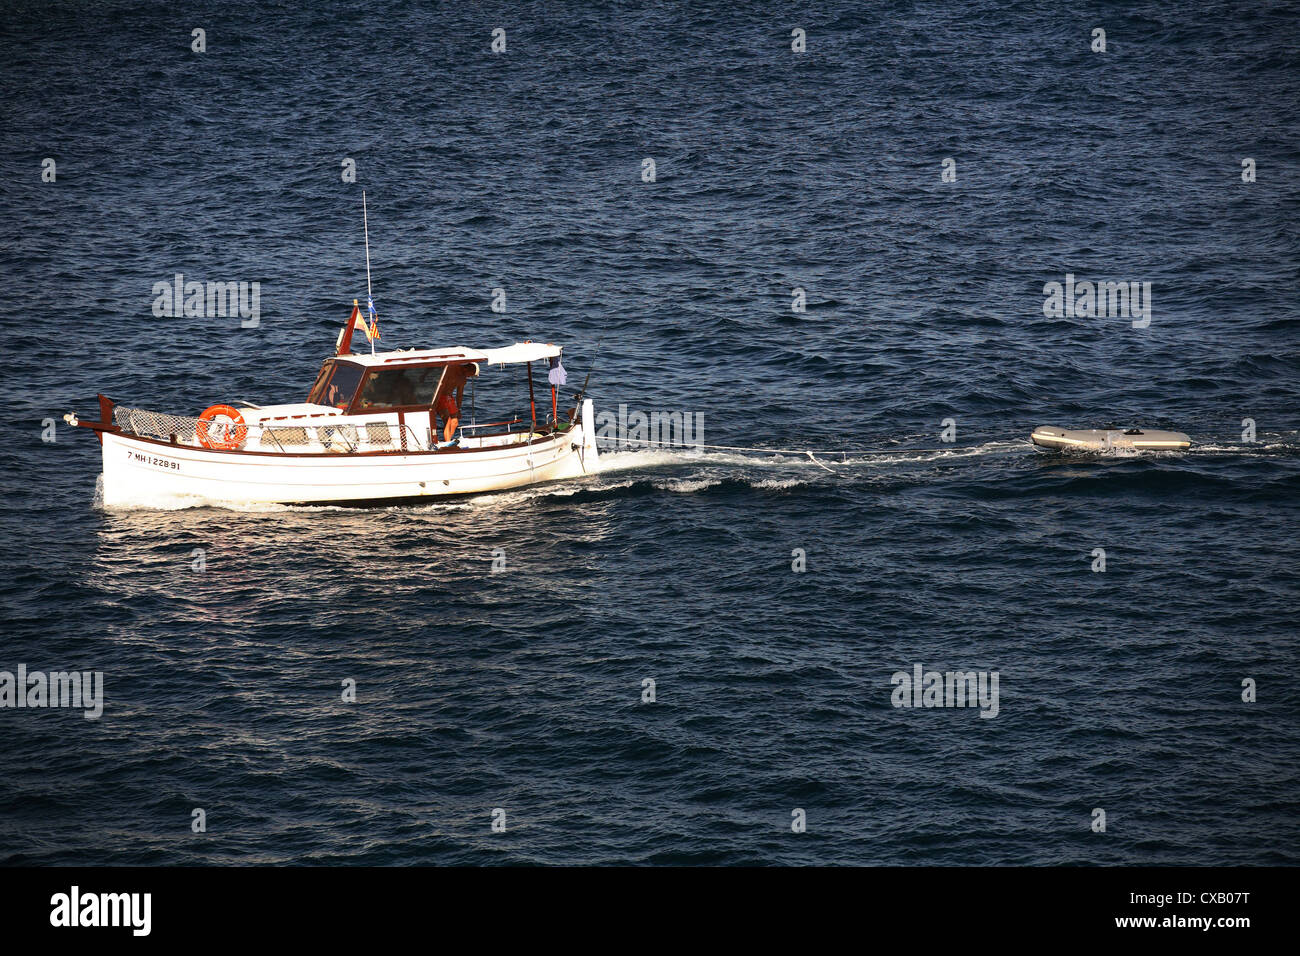 Cala Figuera, fishing boat on the open sea Stock Photo